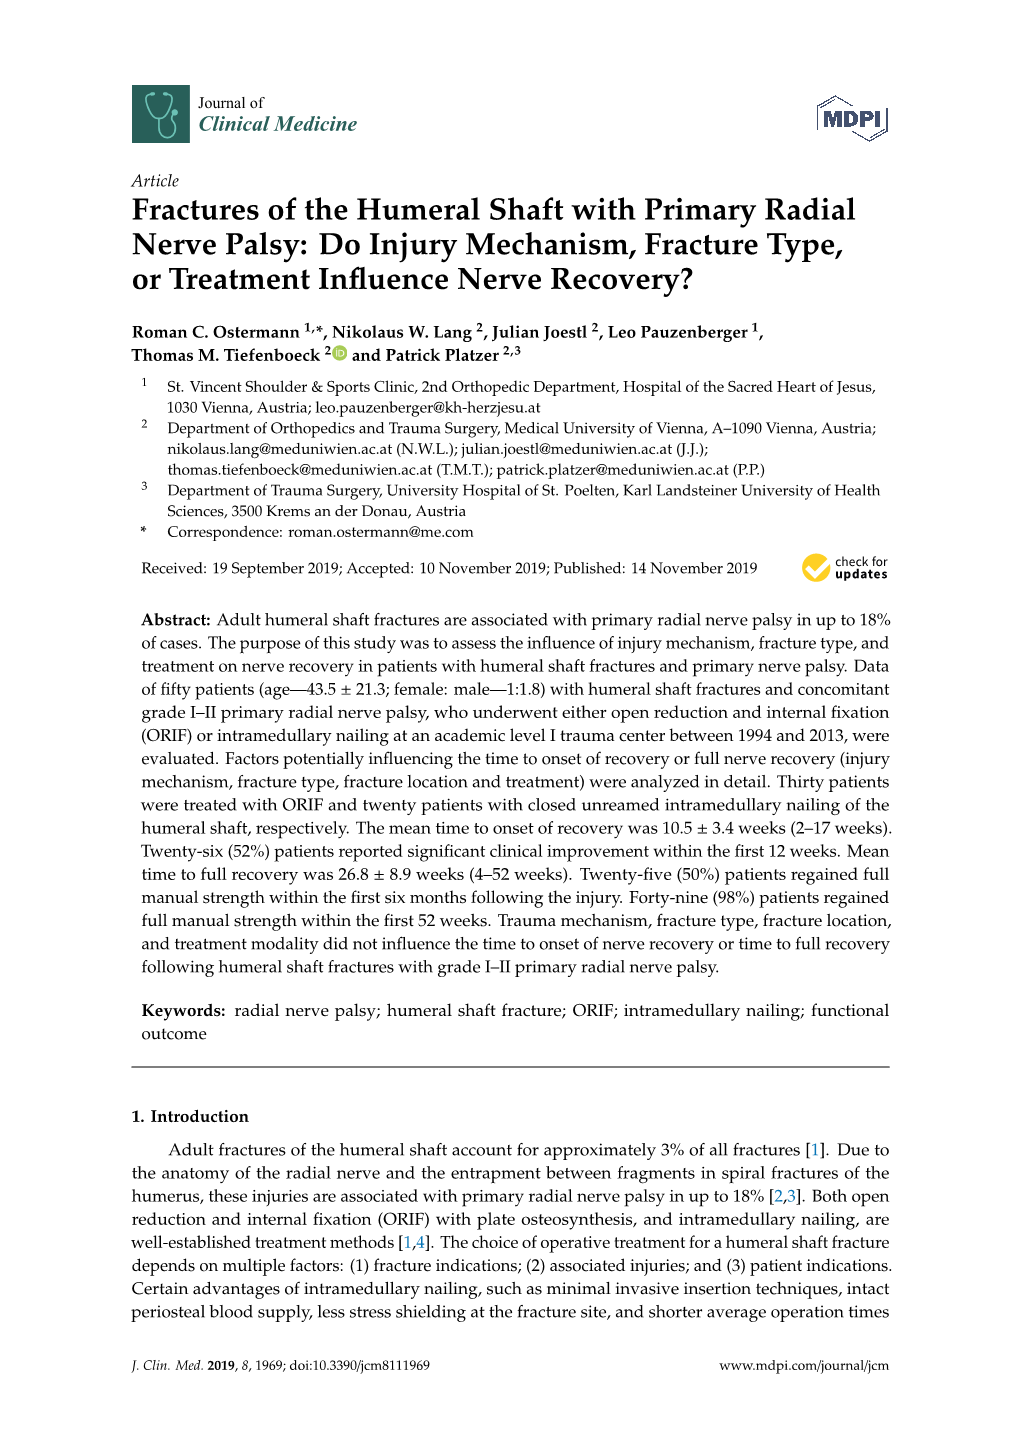 Fractures of the Humeral Shaft with Primary Radial Nerve Palsy: Do Injury Mechanism, Fracture Type, Or Treatment Inﬂuence Nerve Recovery?